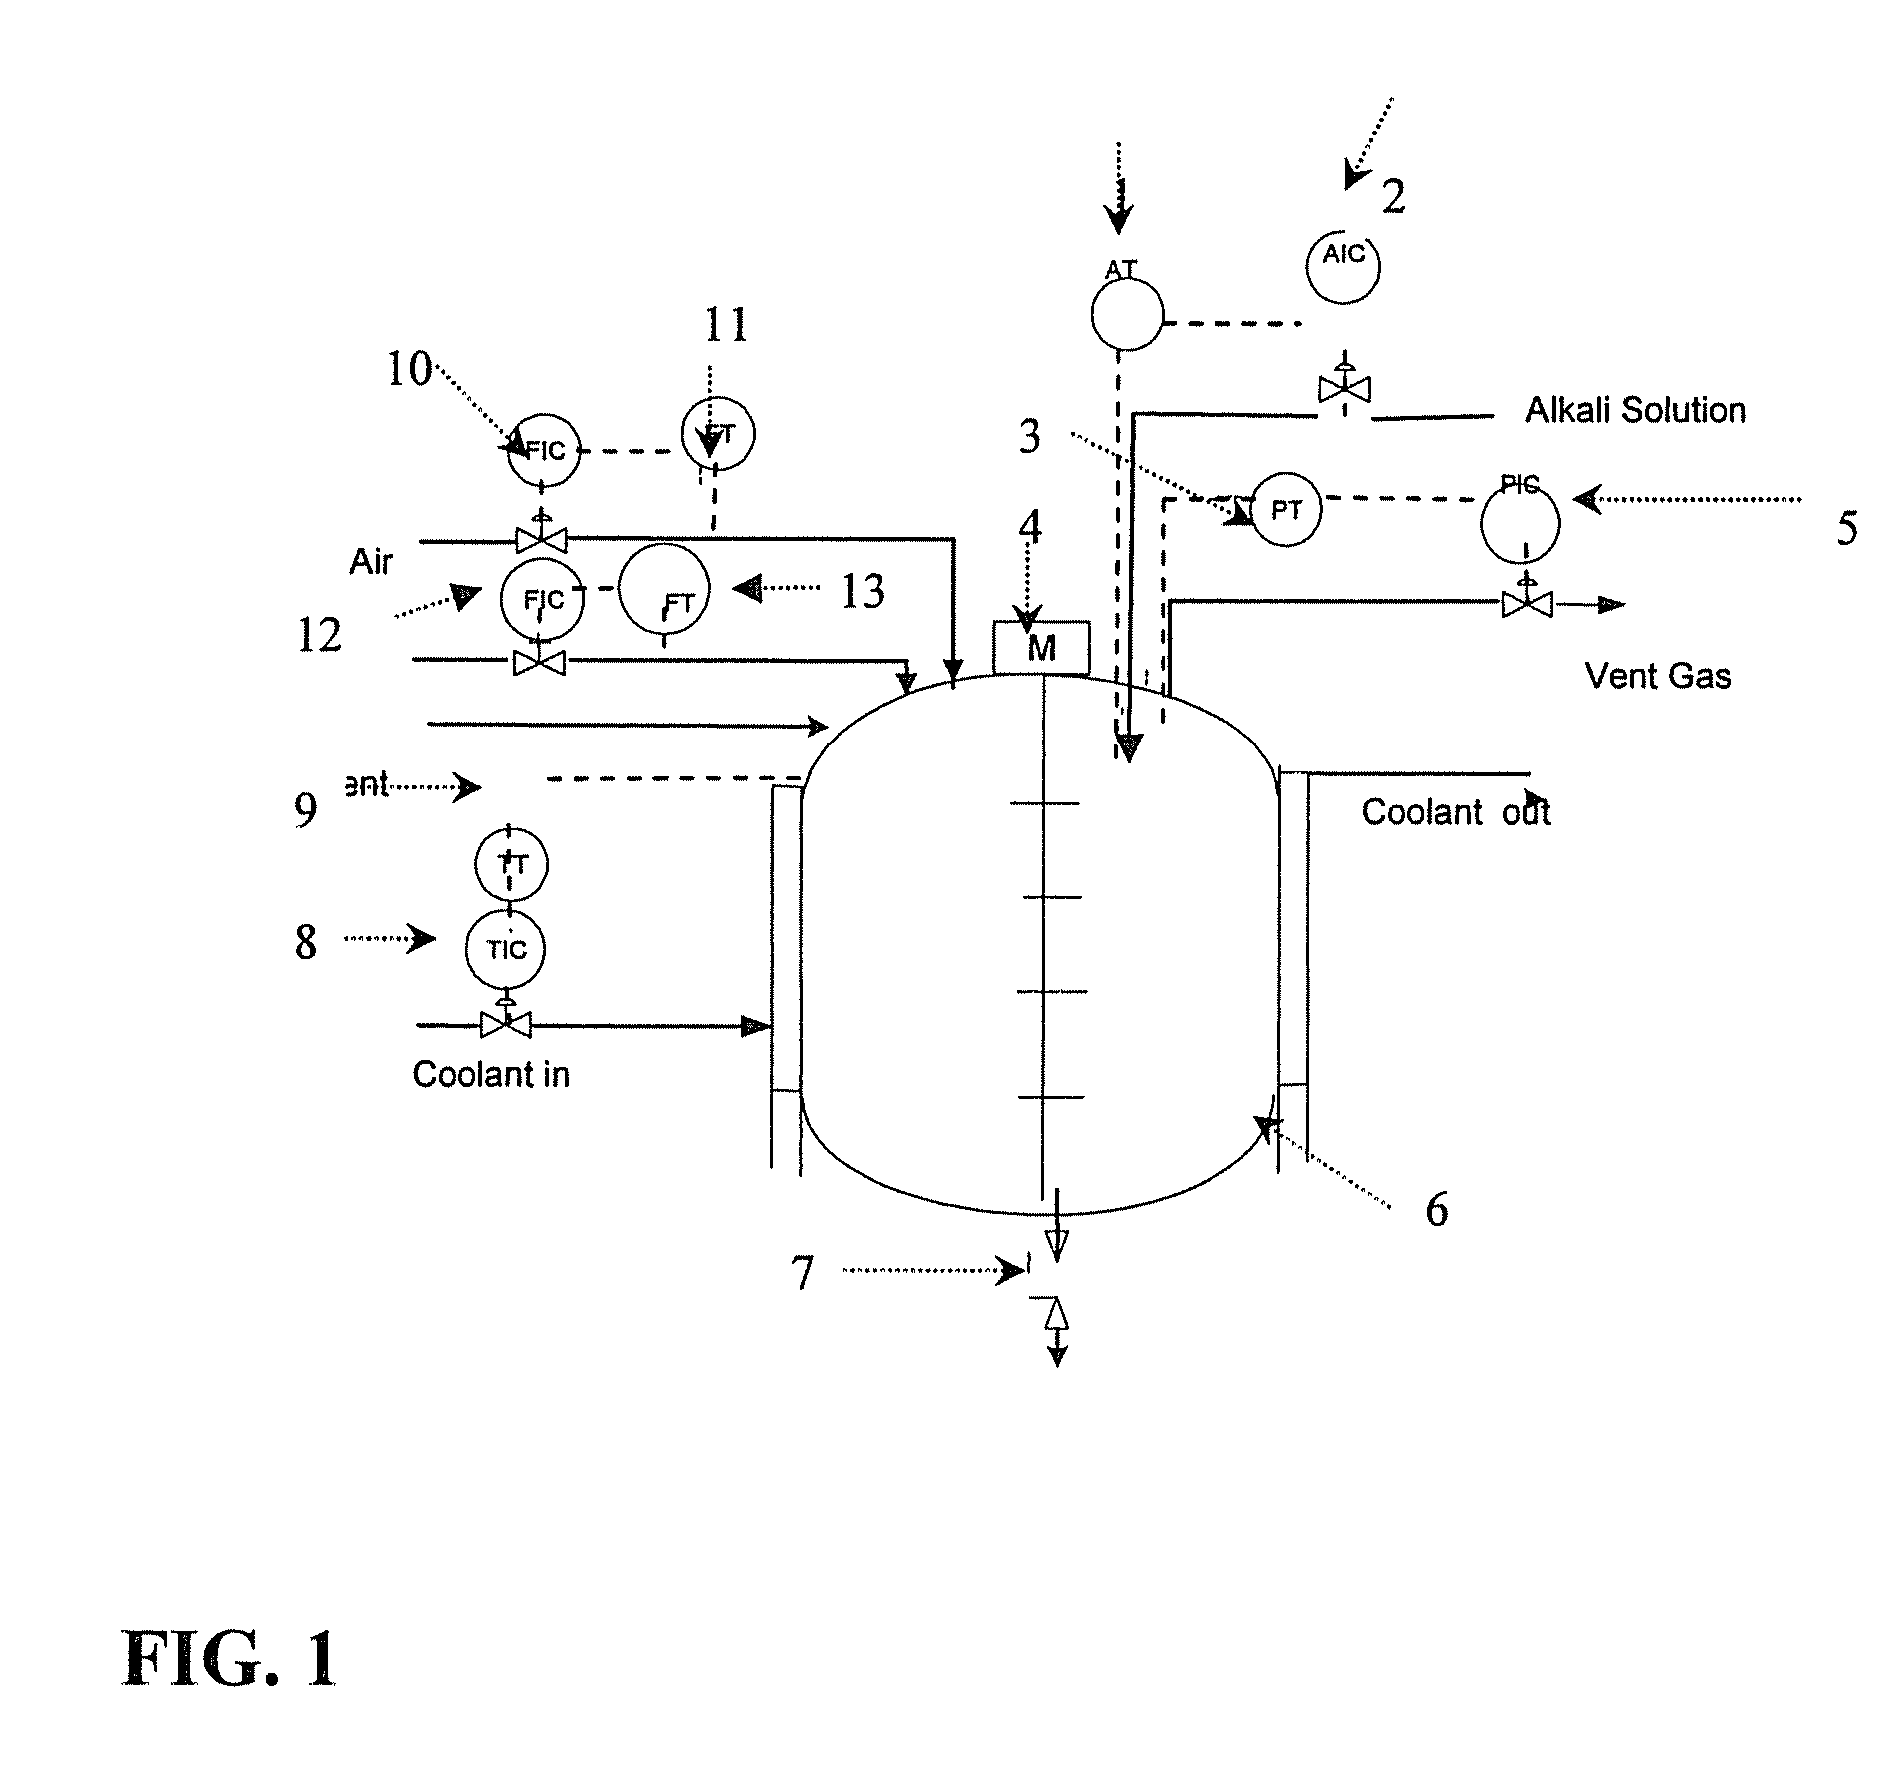 Method for on-line optimization of a fed-batch fermentation unit to maximize the product yield